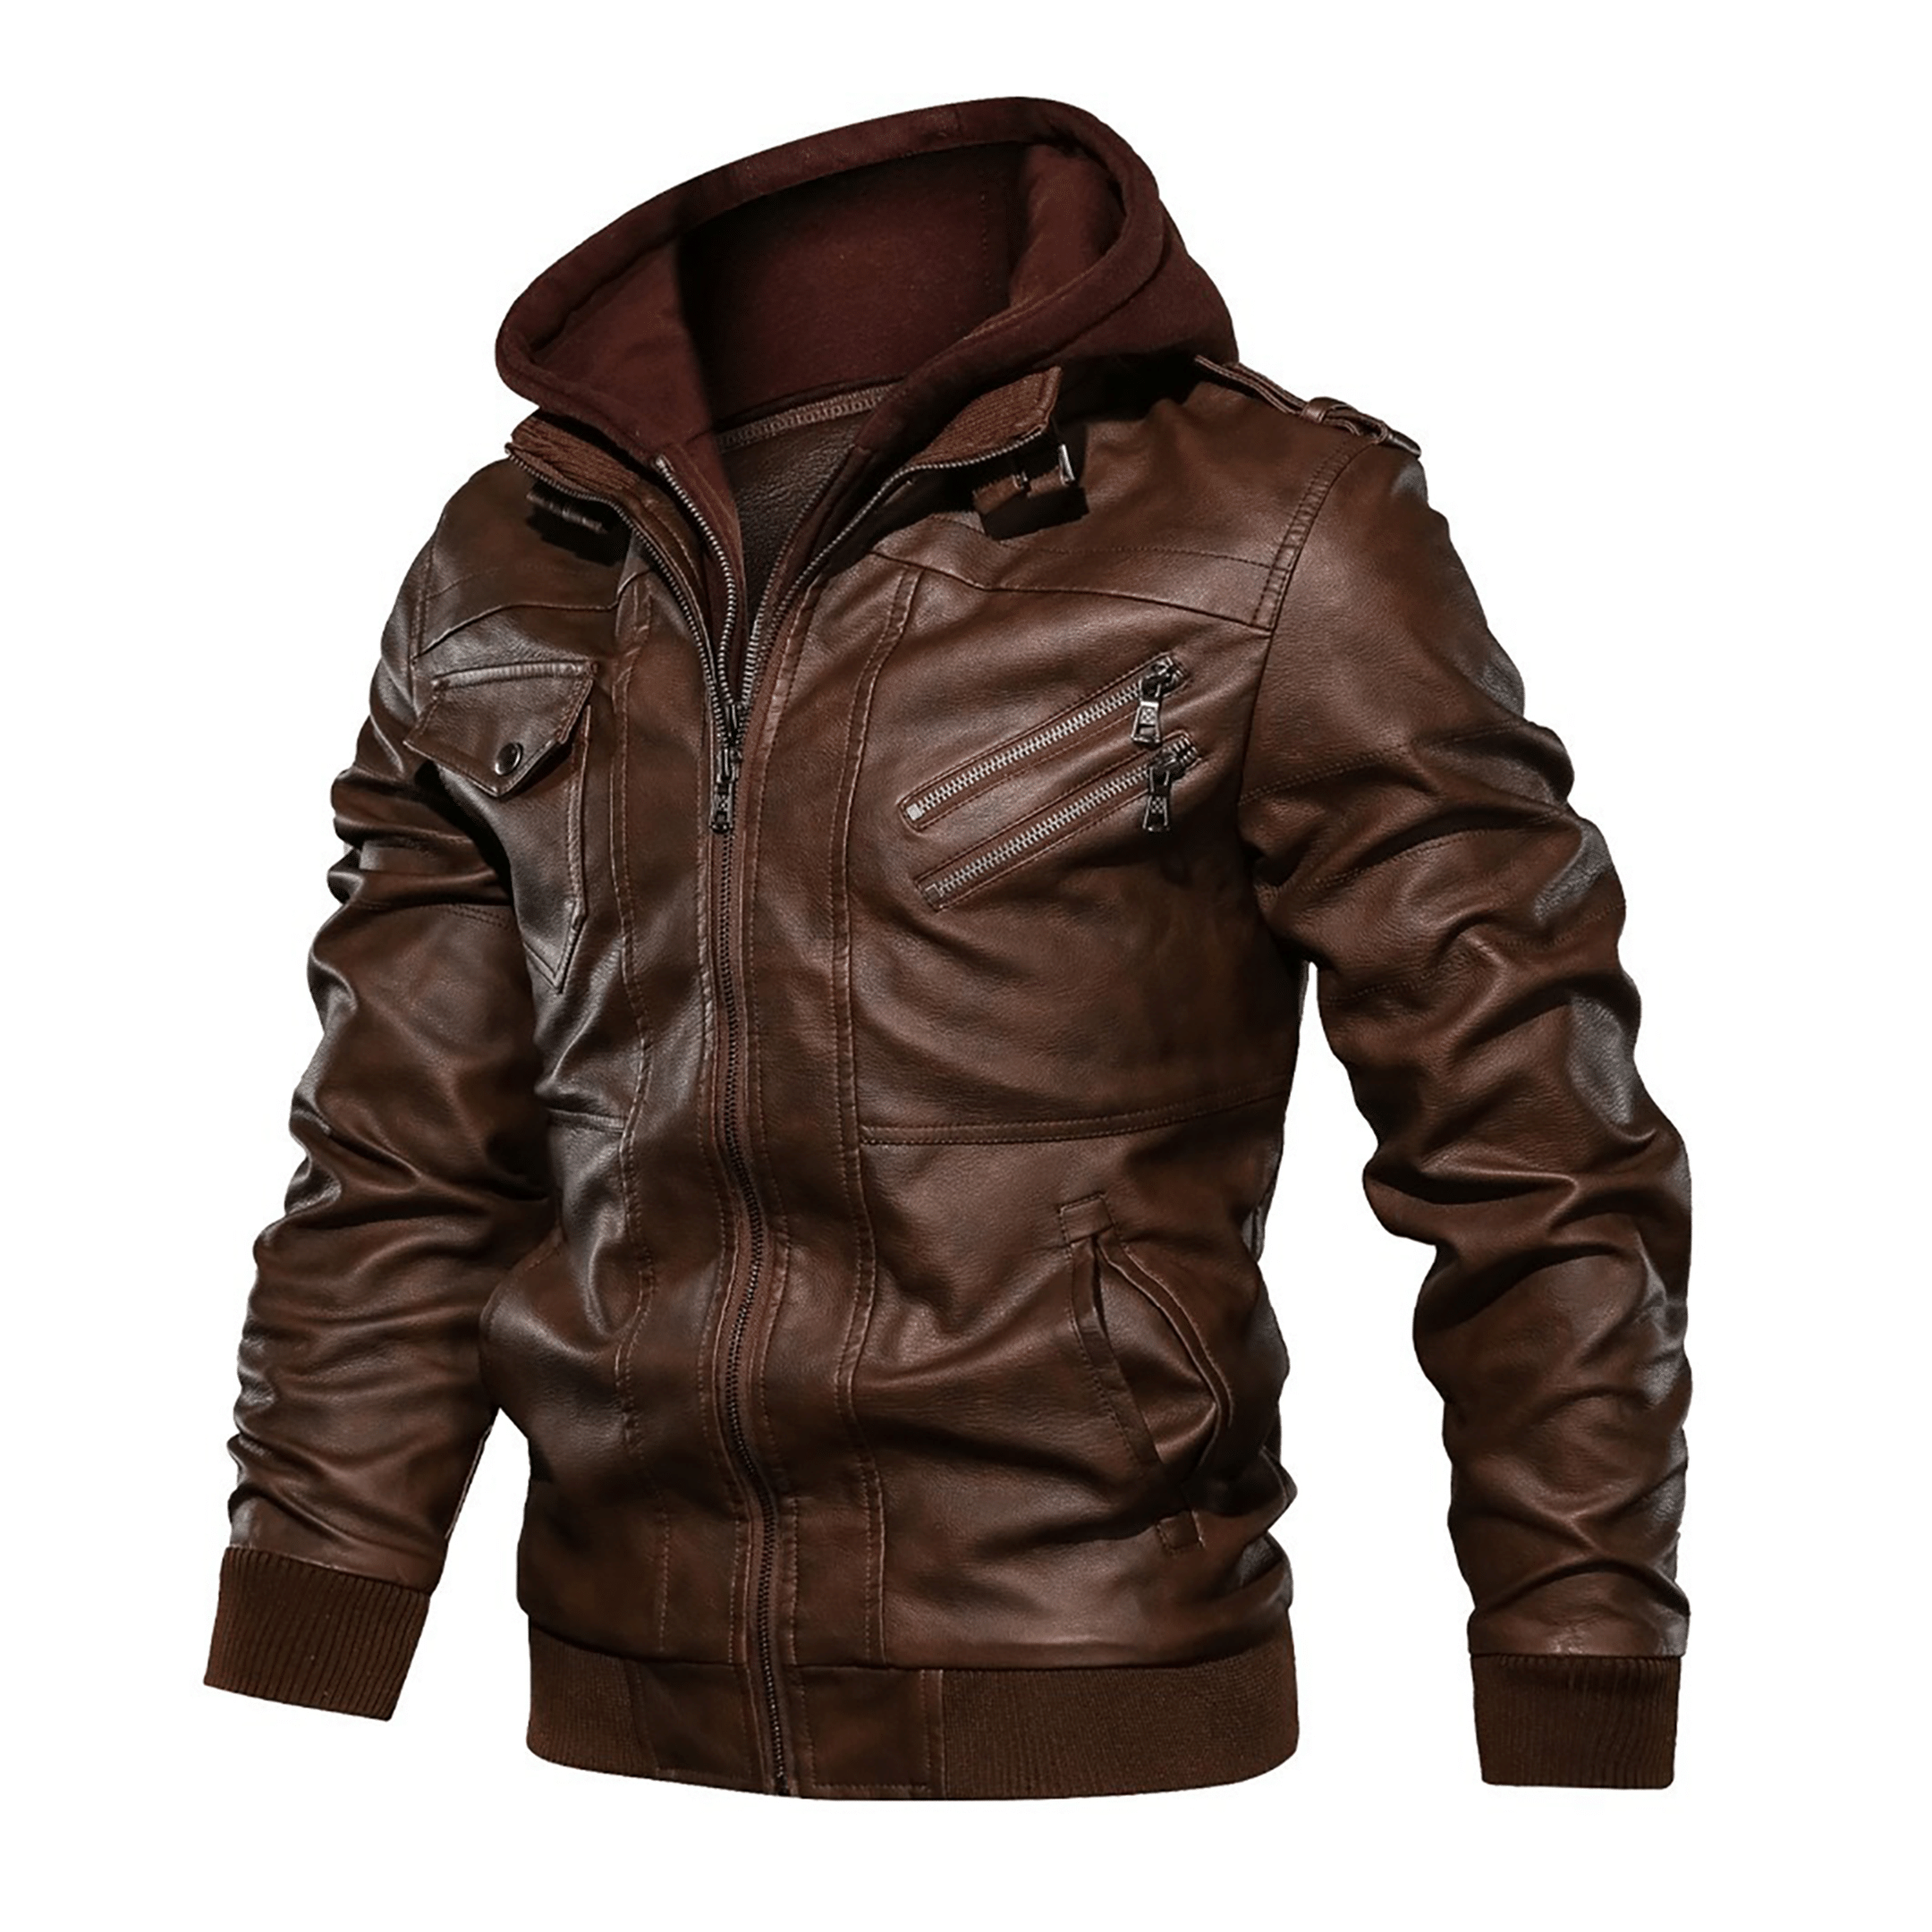 Top leather jackets and latest products 219